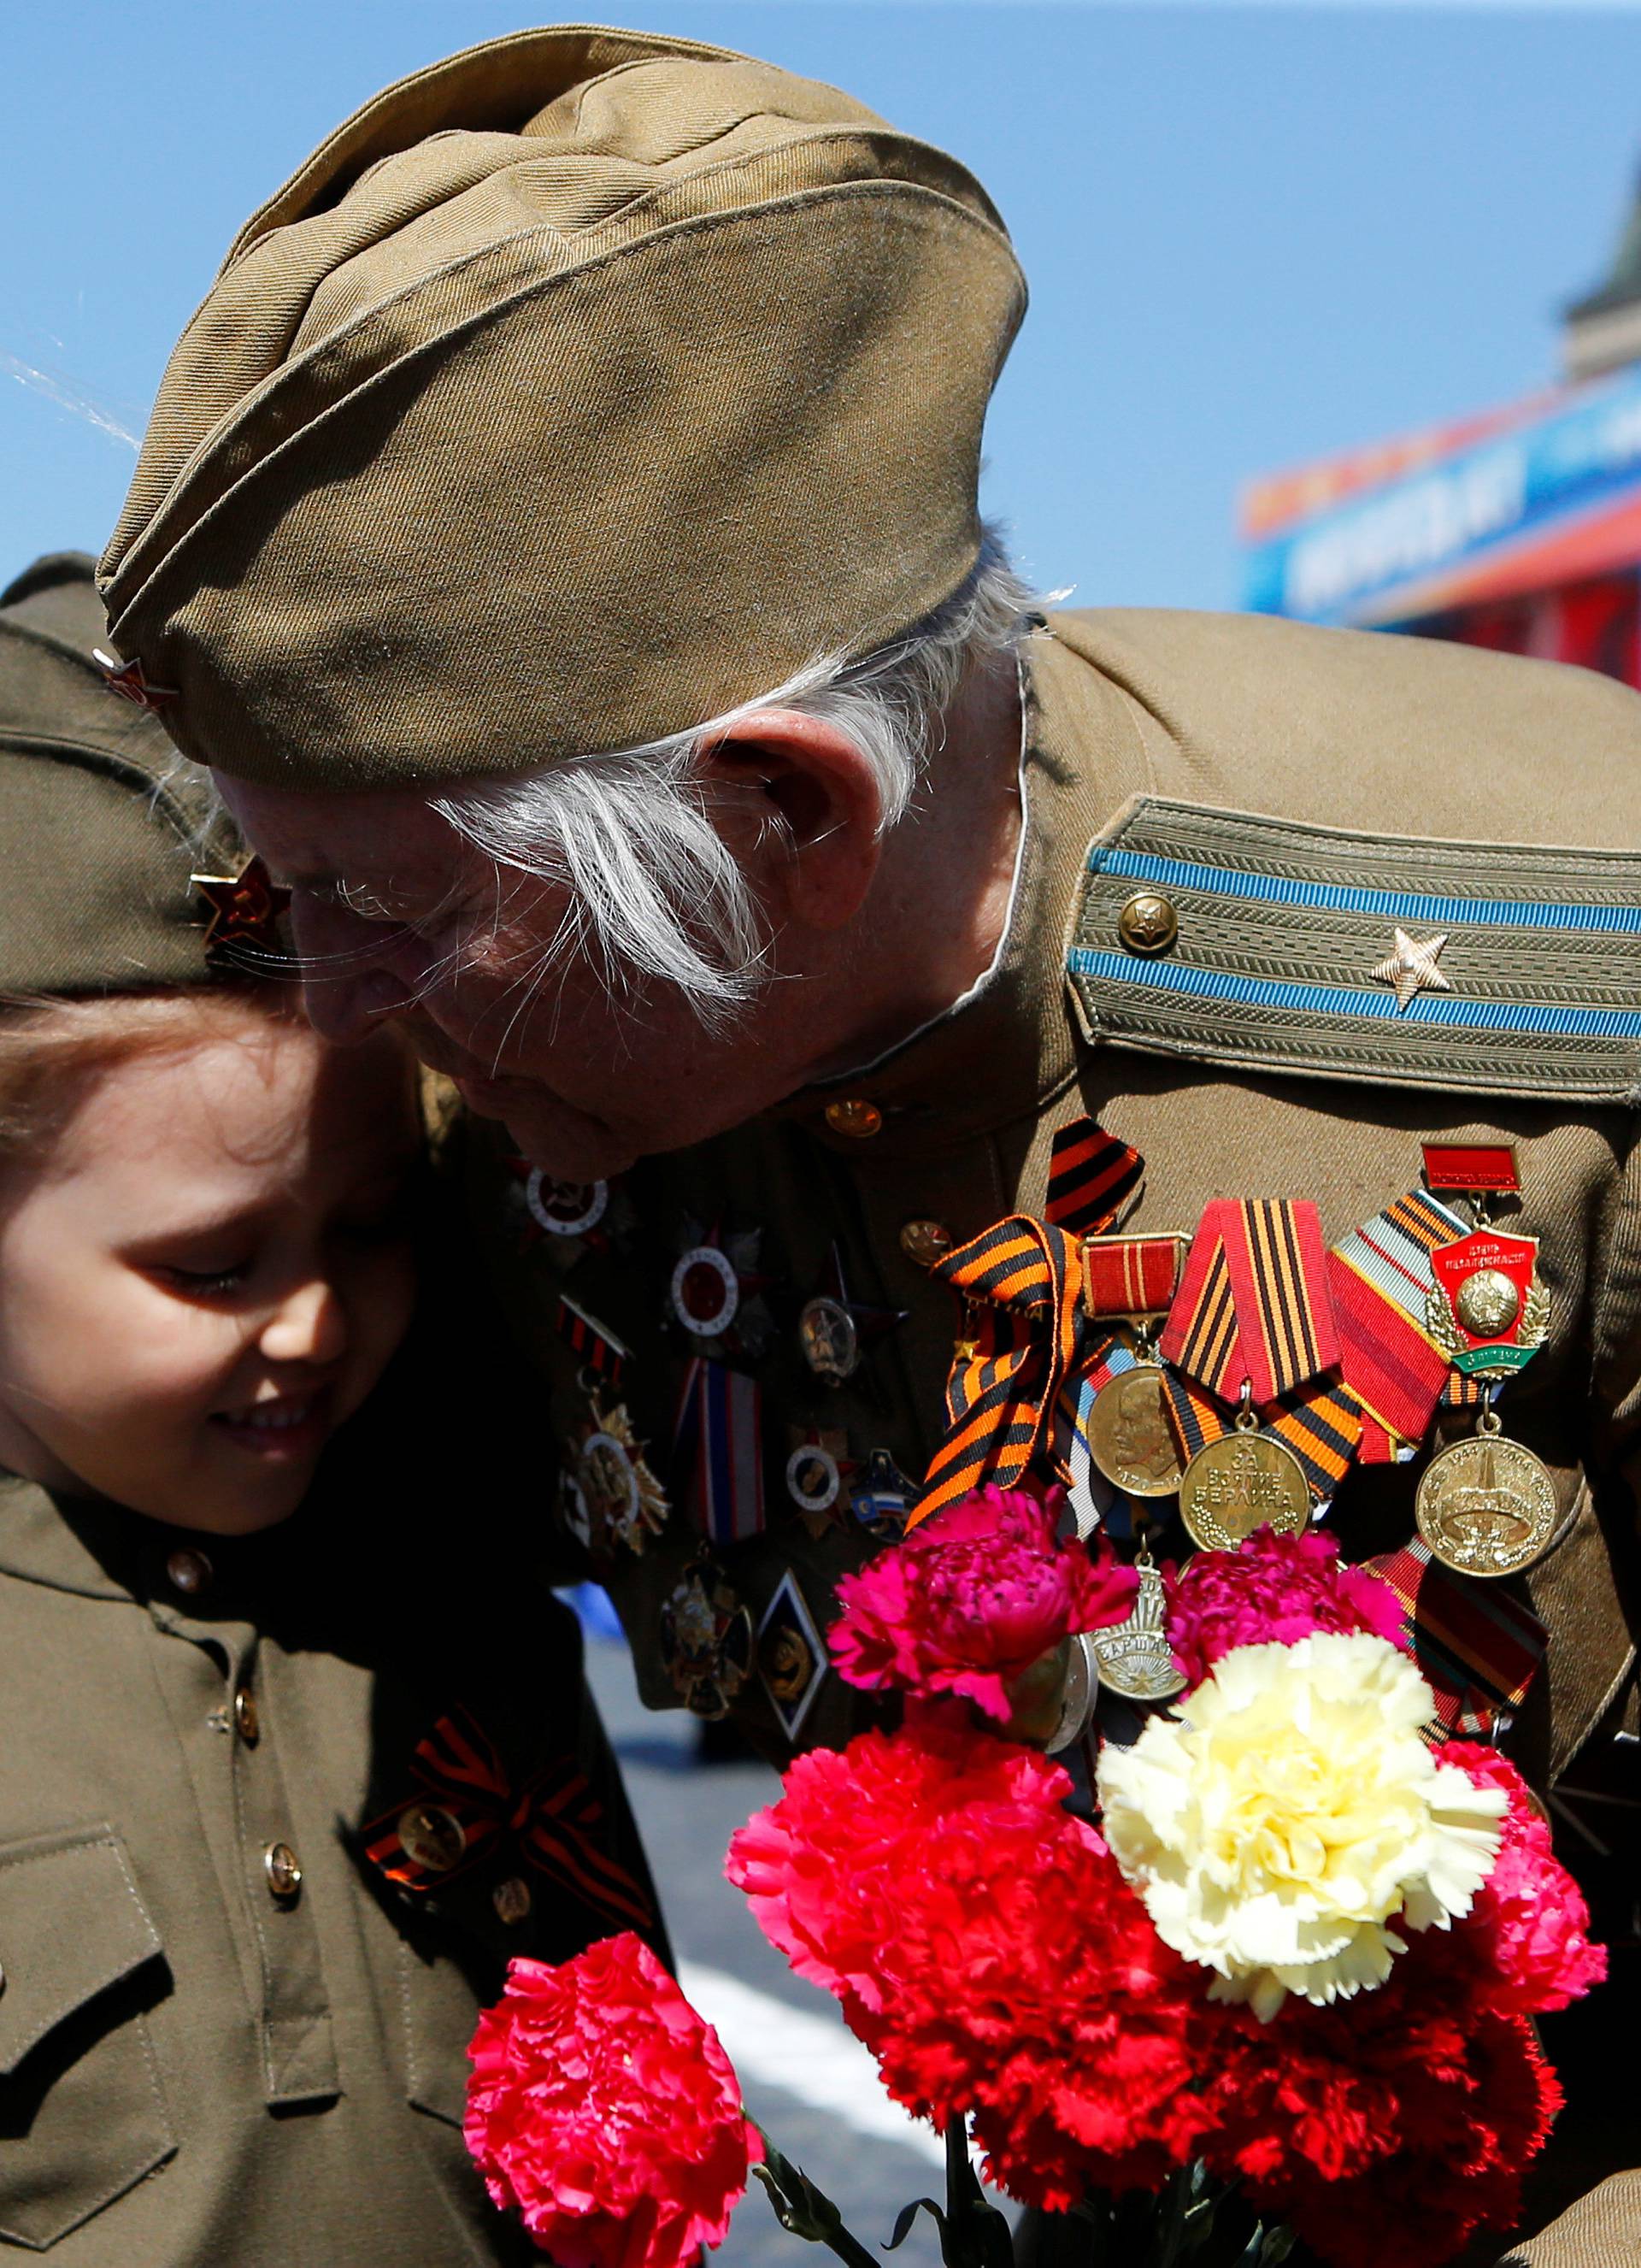 A veteran embraces a girl during the Victory Day celebrations, marking the 73rd anniversary of the victory over Nazi Germany in World War Two, at Red Square in Moscow